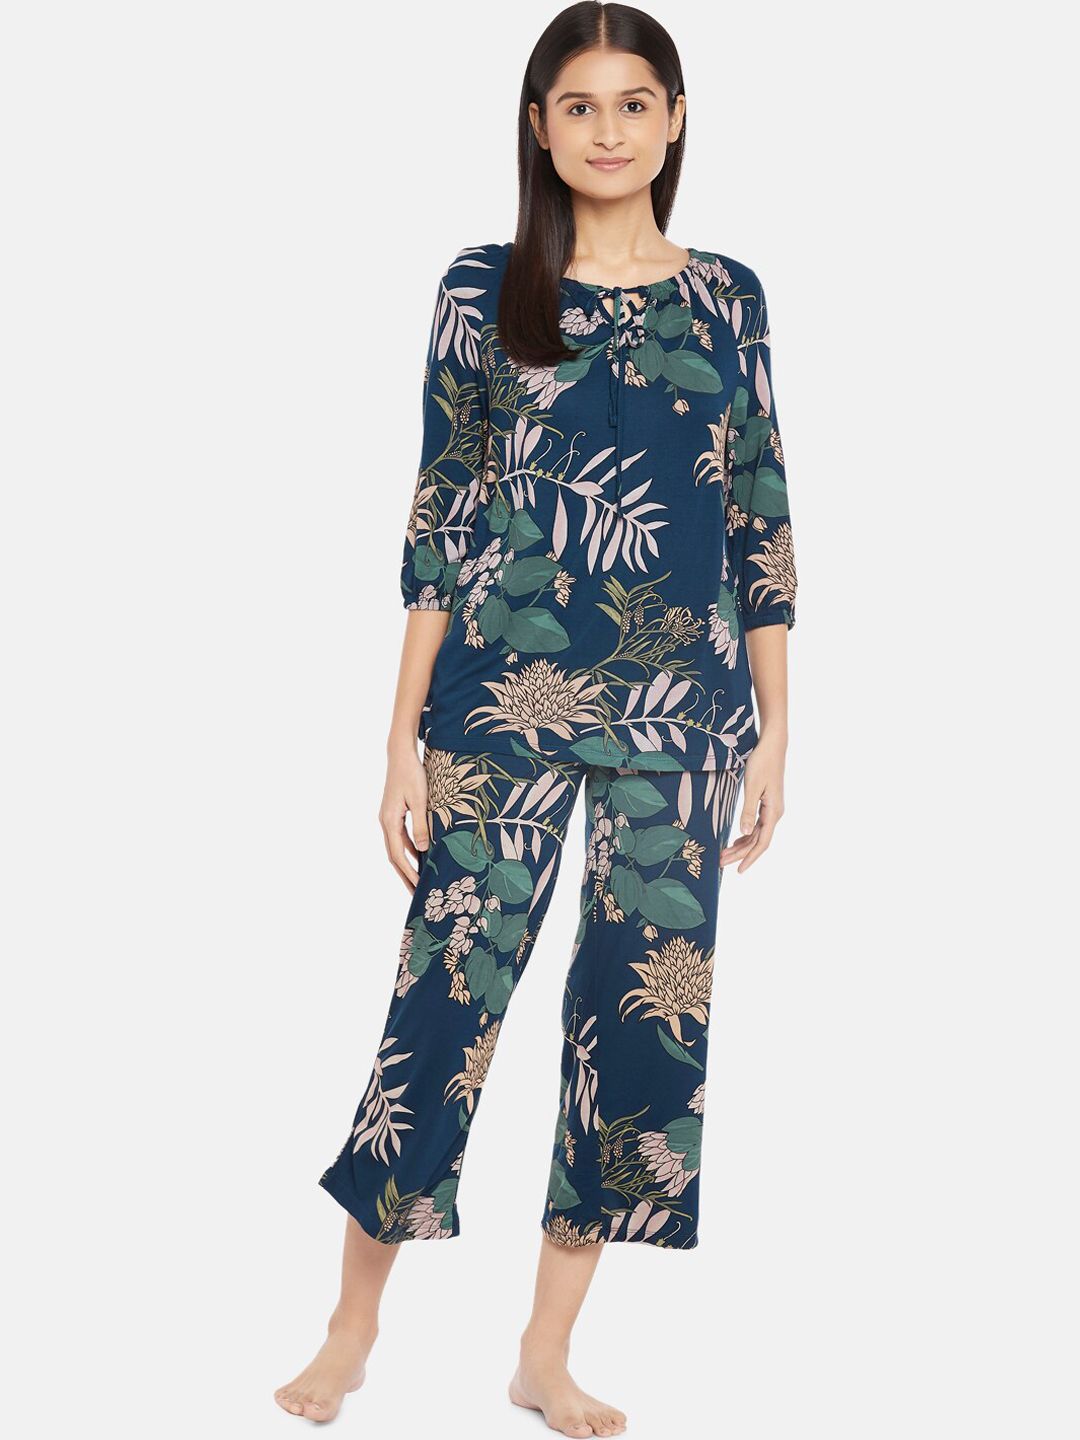 Dreamz by Pantaloons Women Teal Printed Night Suit Price in India